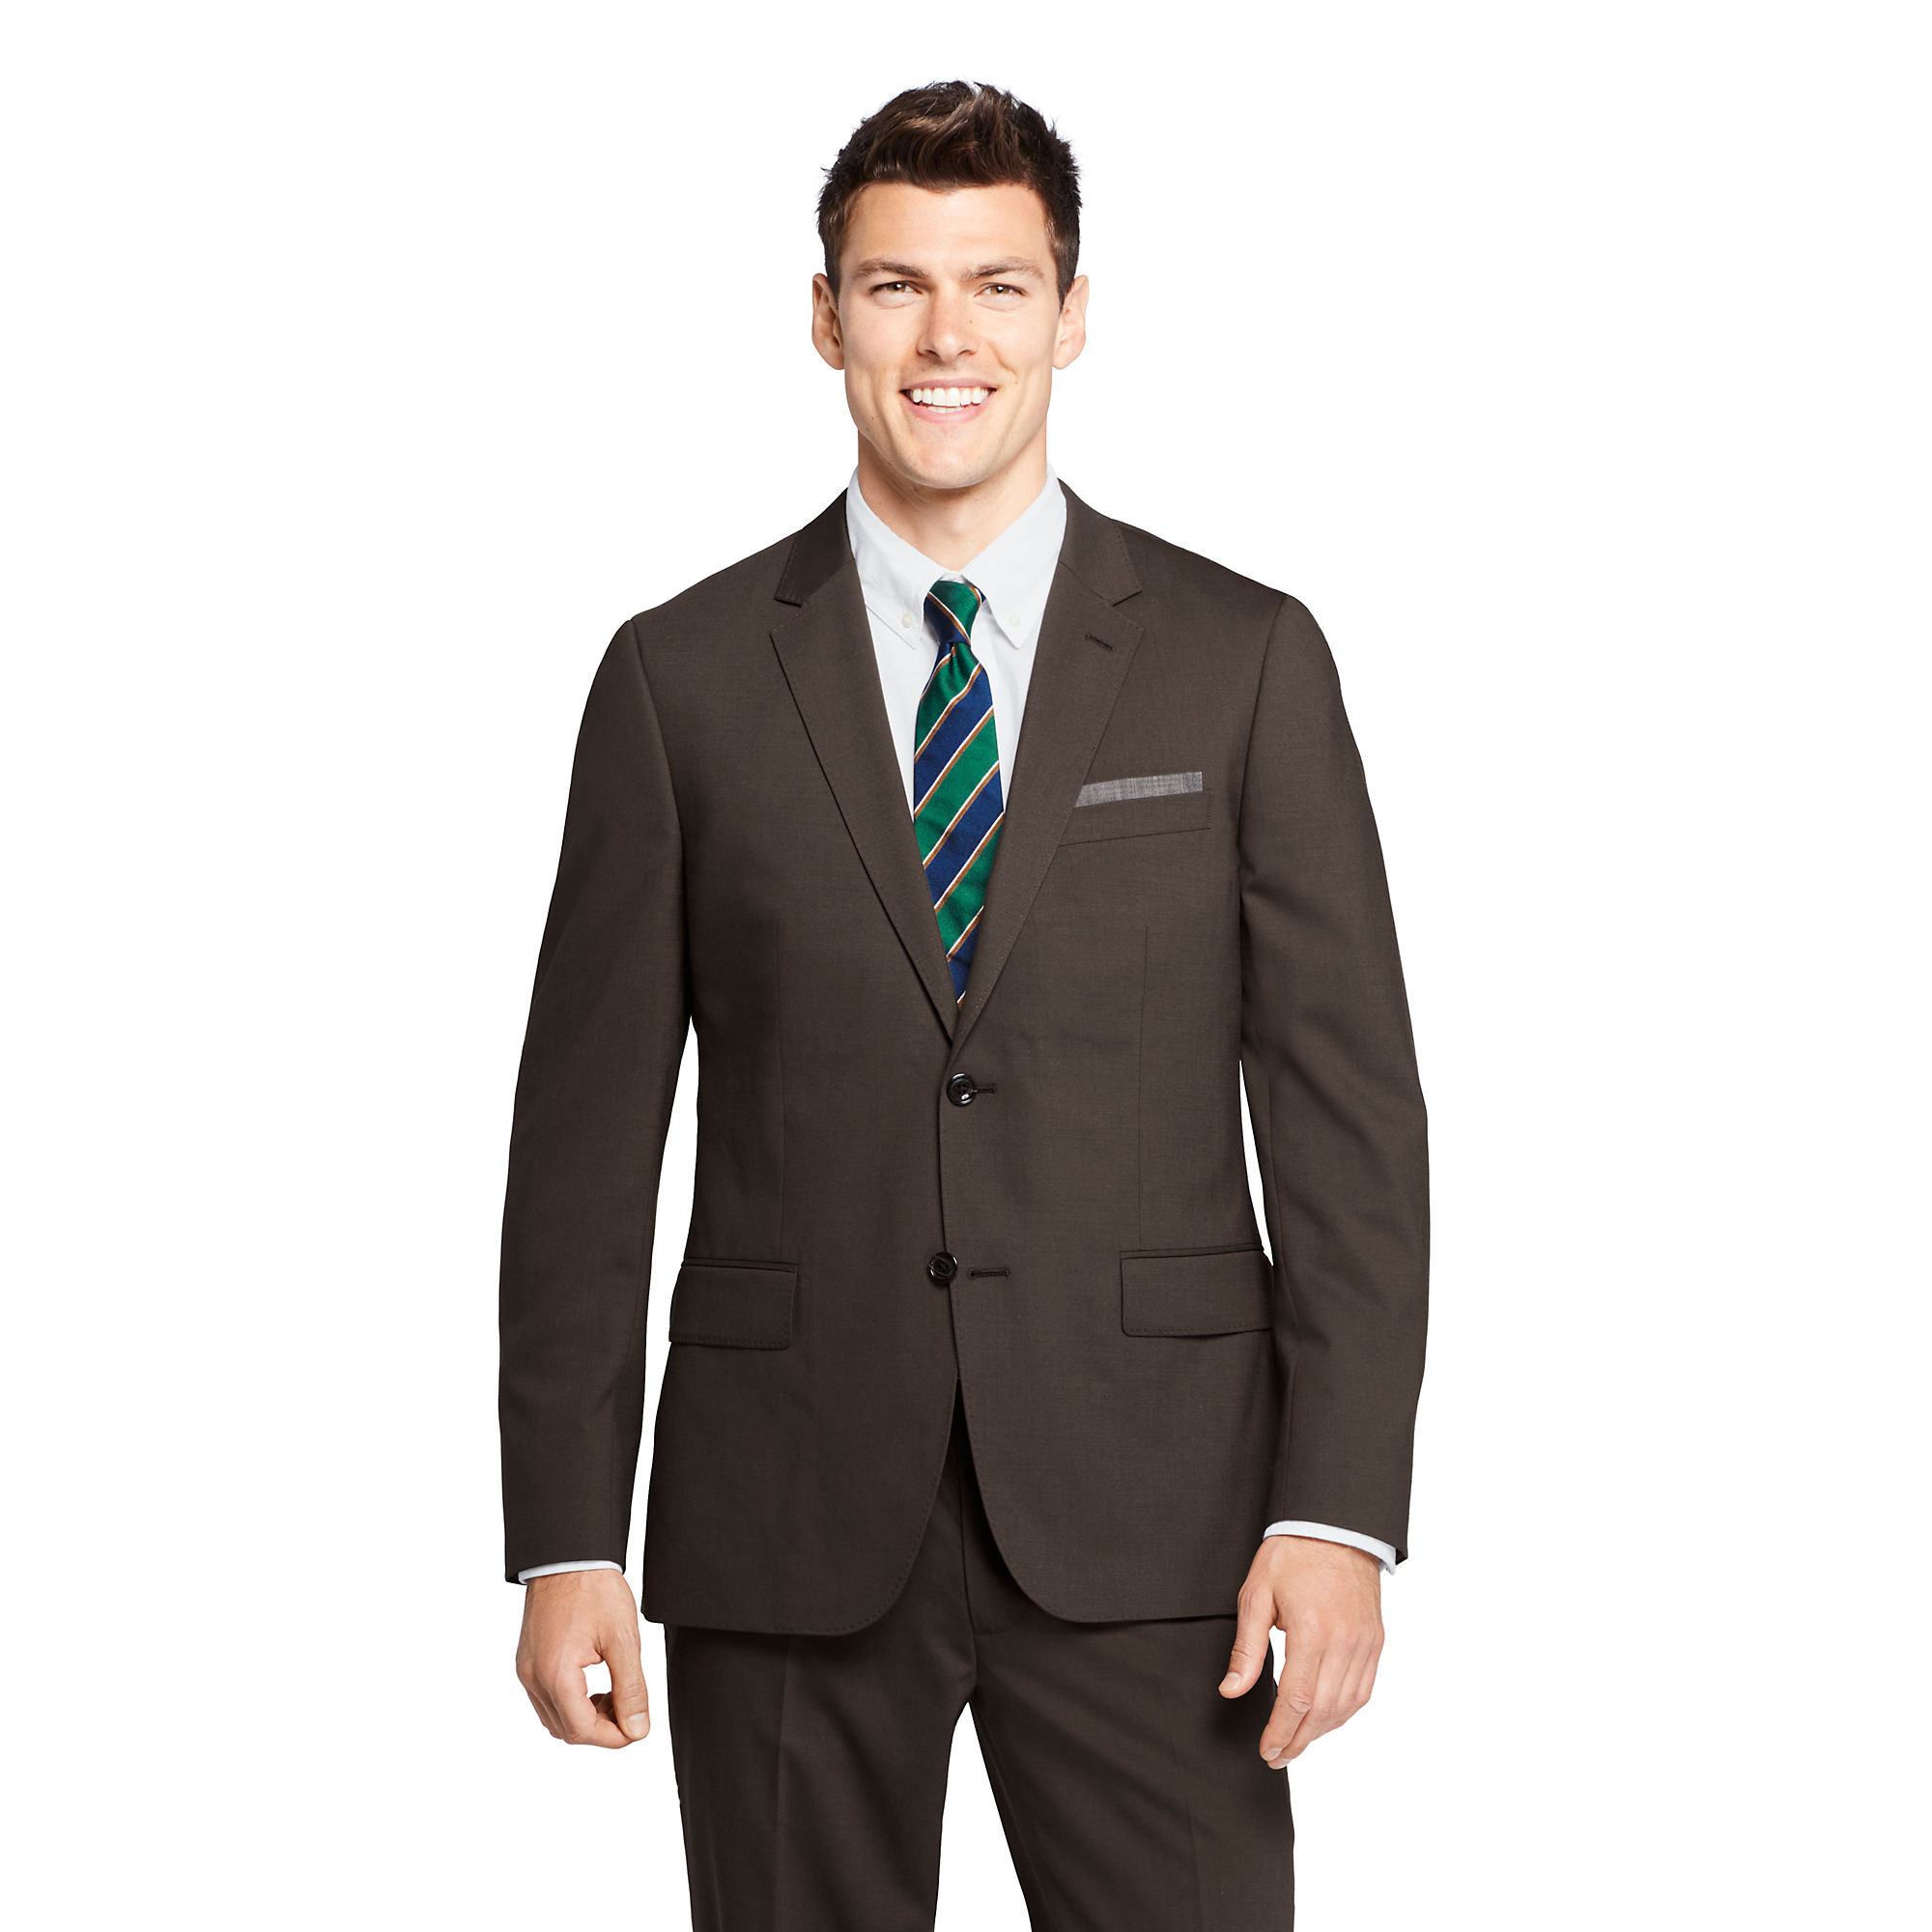 Lands End Men's Tailored Fit Comfort First Year'rounder Suit Jacket